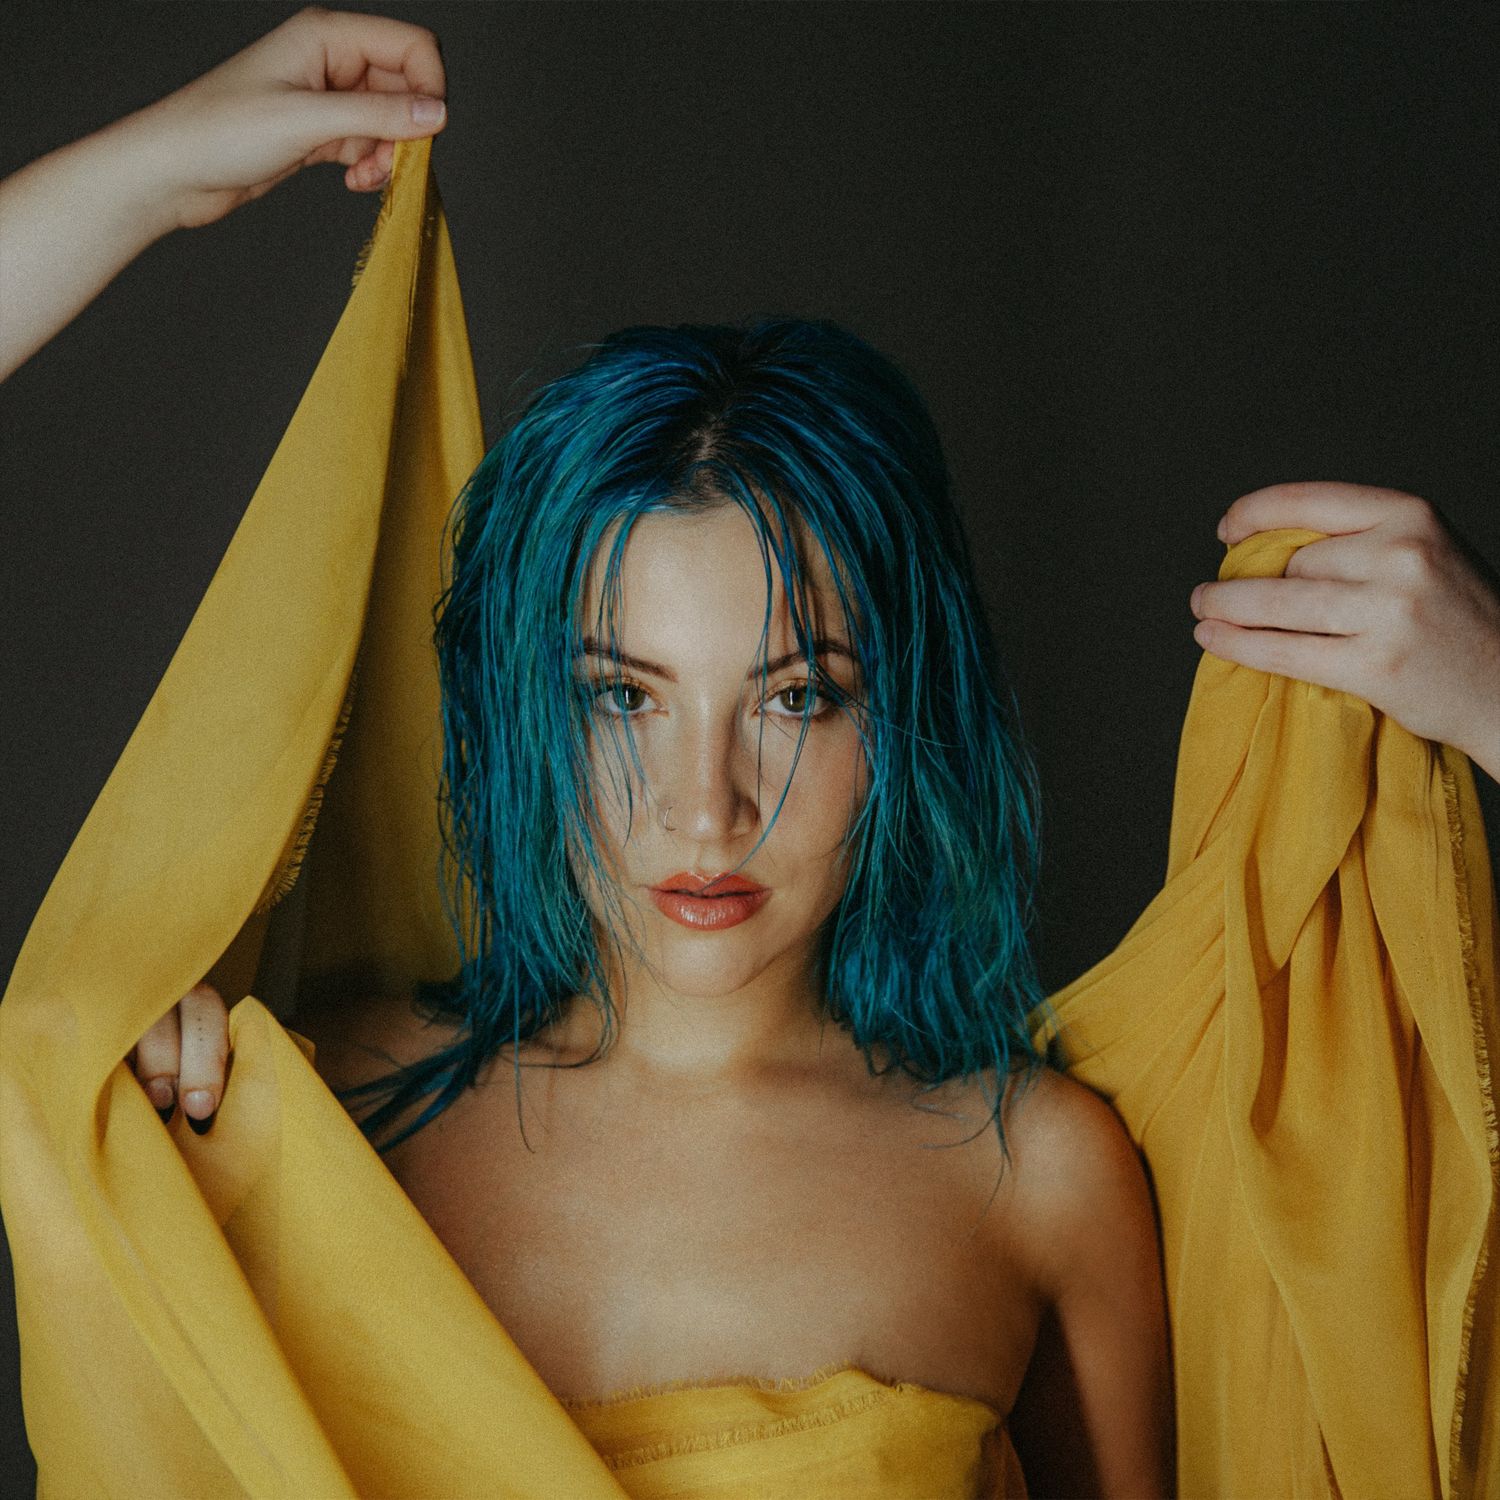 AMY SHEPPARD SHARES DEBUT SOLO SINGLE ‘NOTHING BUT WILD’